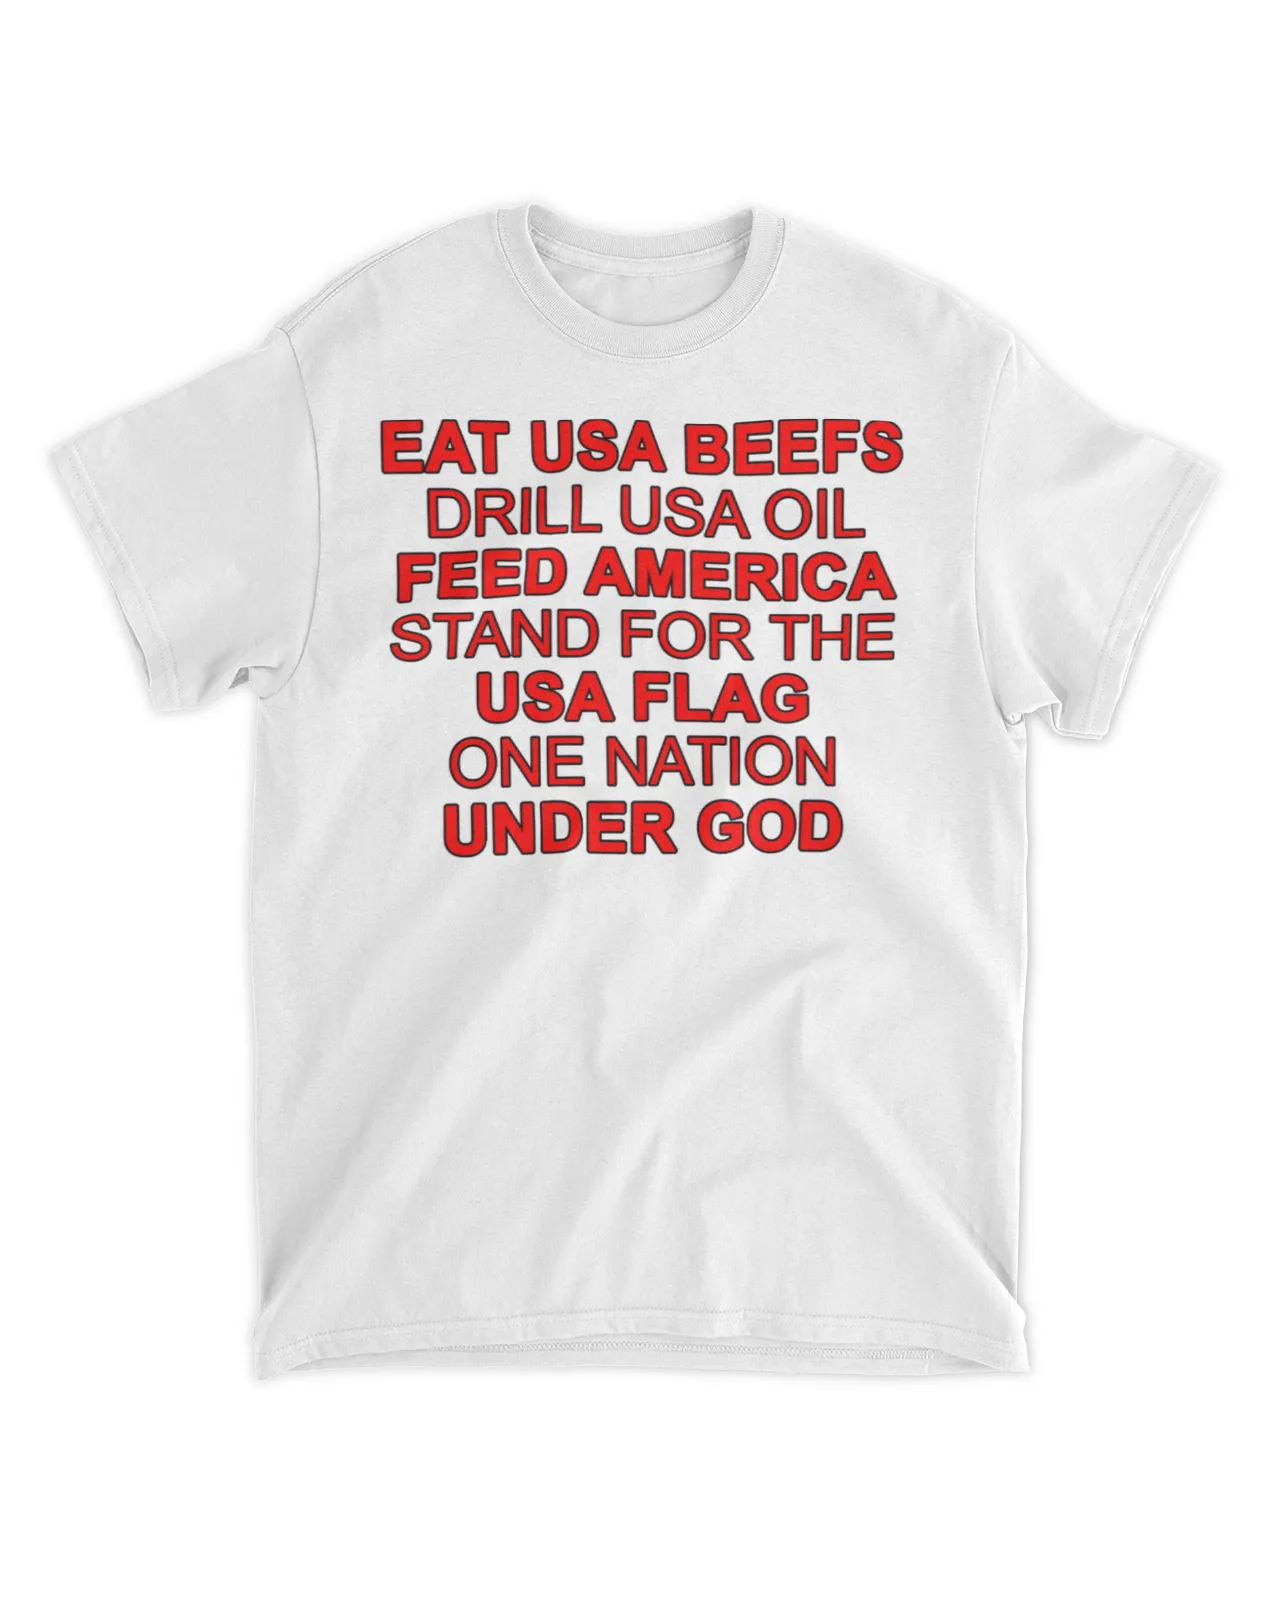  Eat USA beefs drill USA oil feed America stand for the USA flag one nation under God shirt